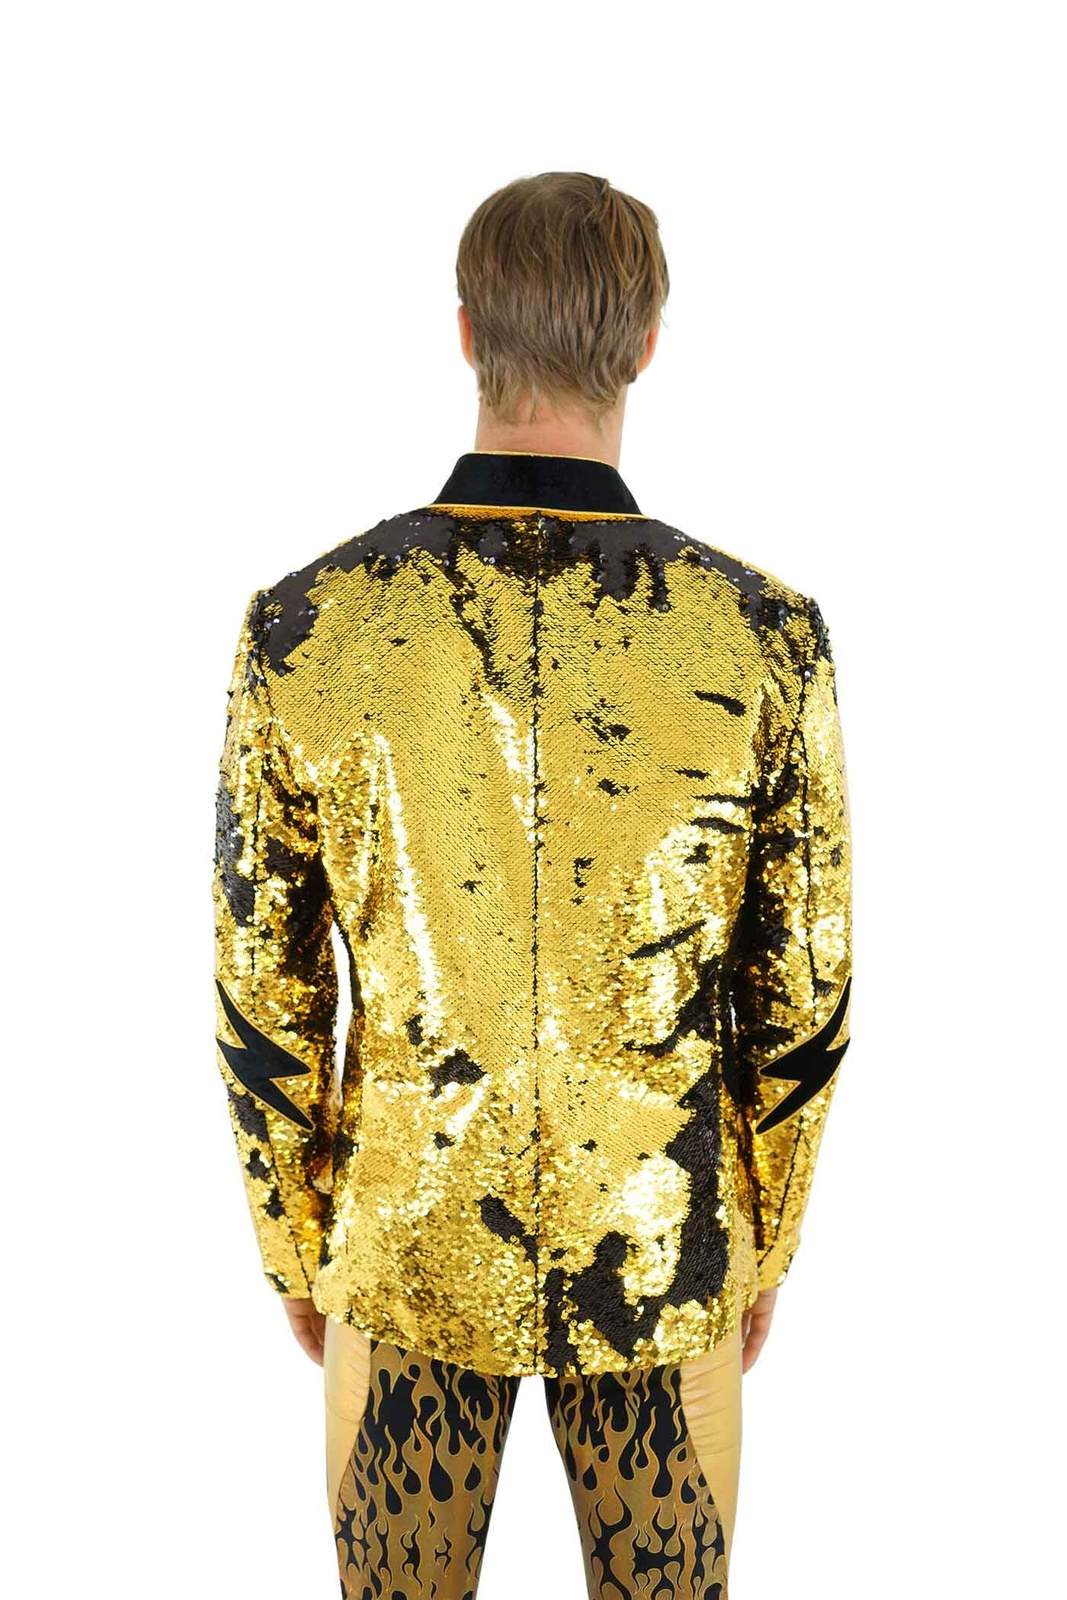 Mens Gold Blazer with Lightning Bolts from Love Khaos Festival Clothing Brand